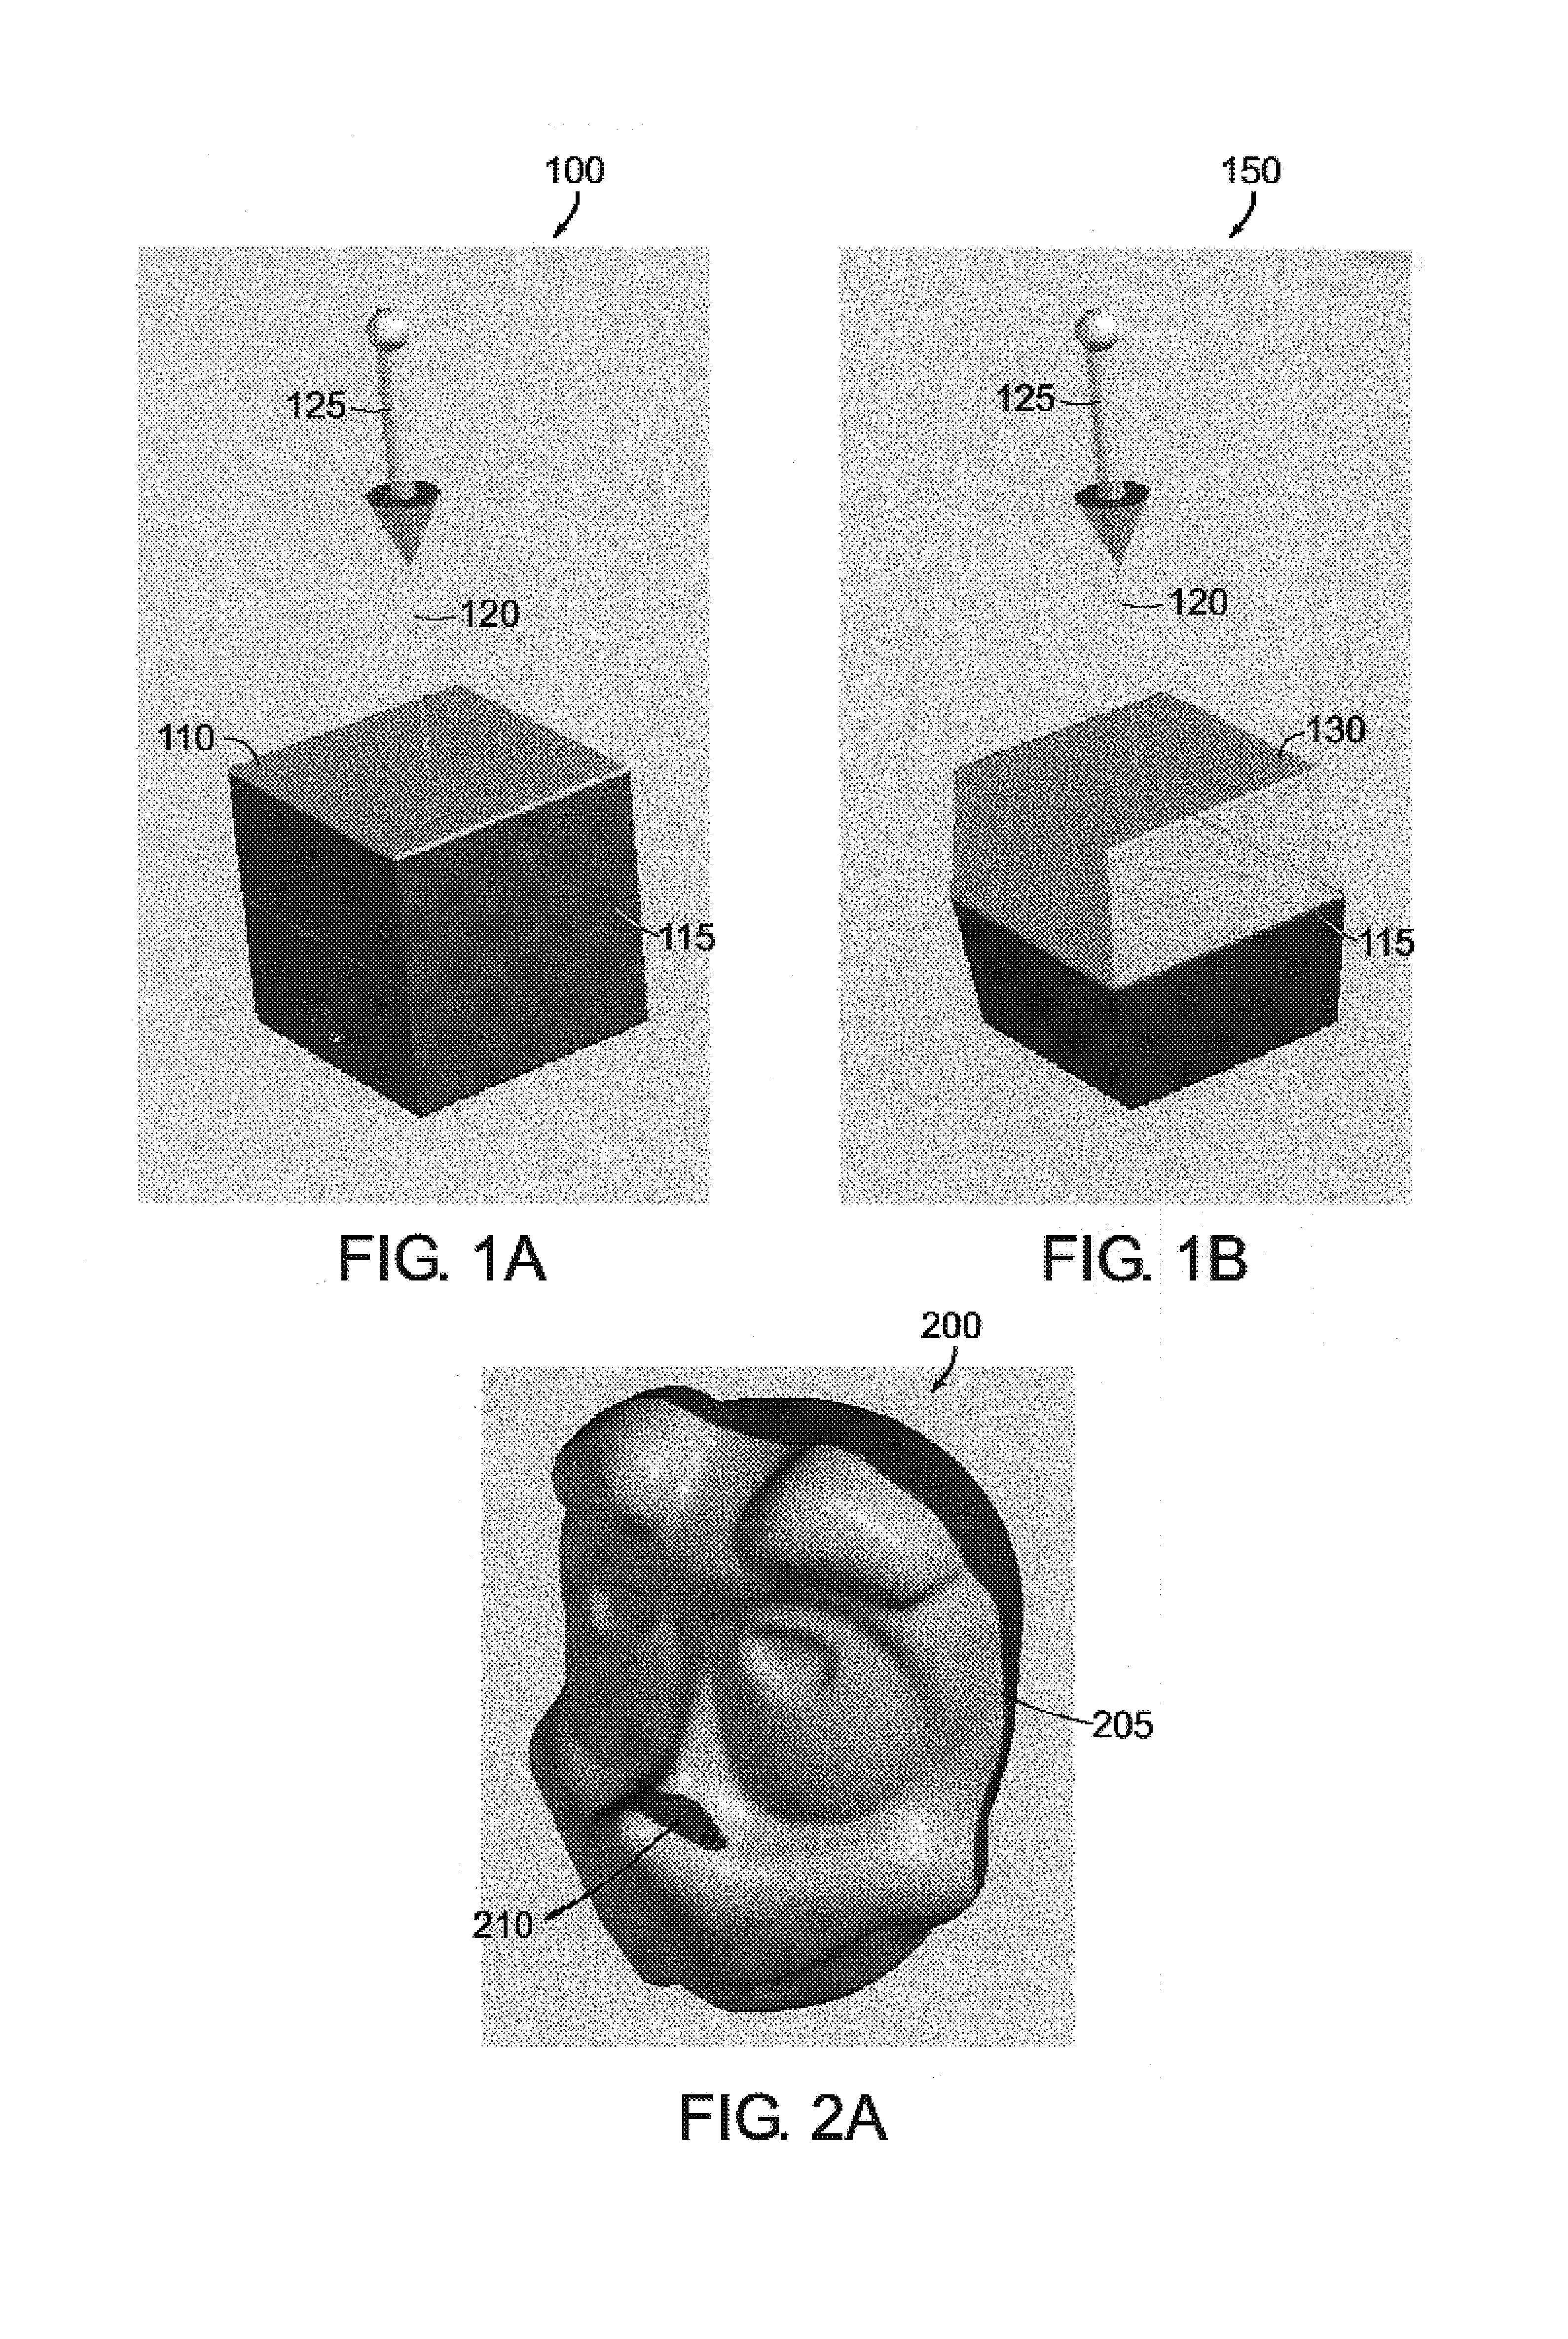 Apparatus and methods for modifying a model of an object to enforce compliance with a manufacturing constraint